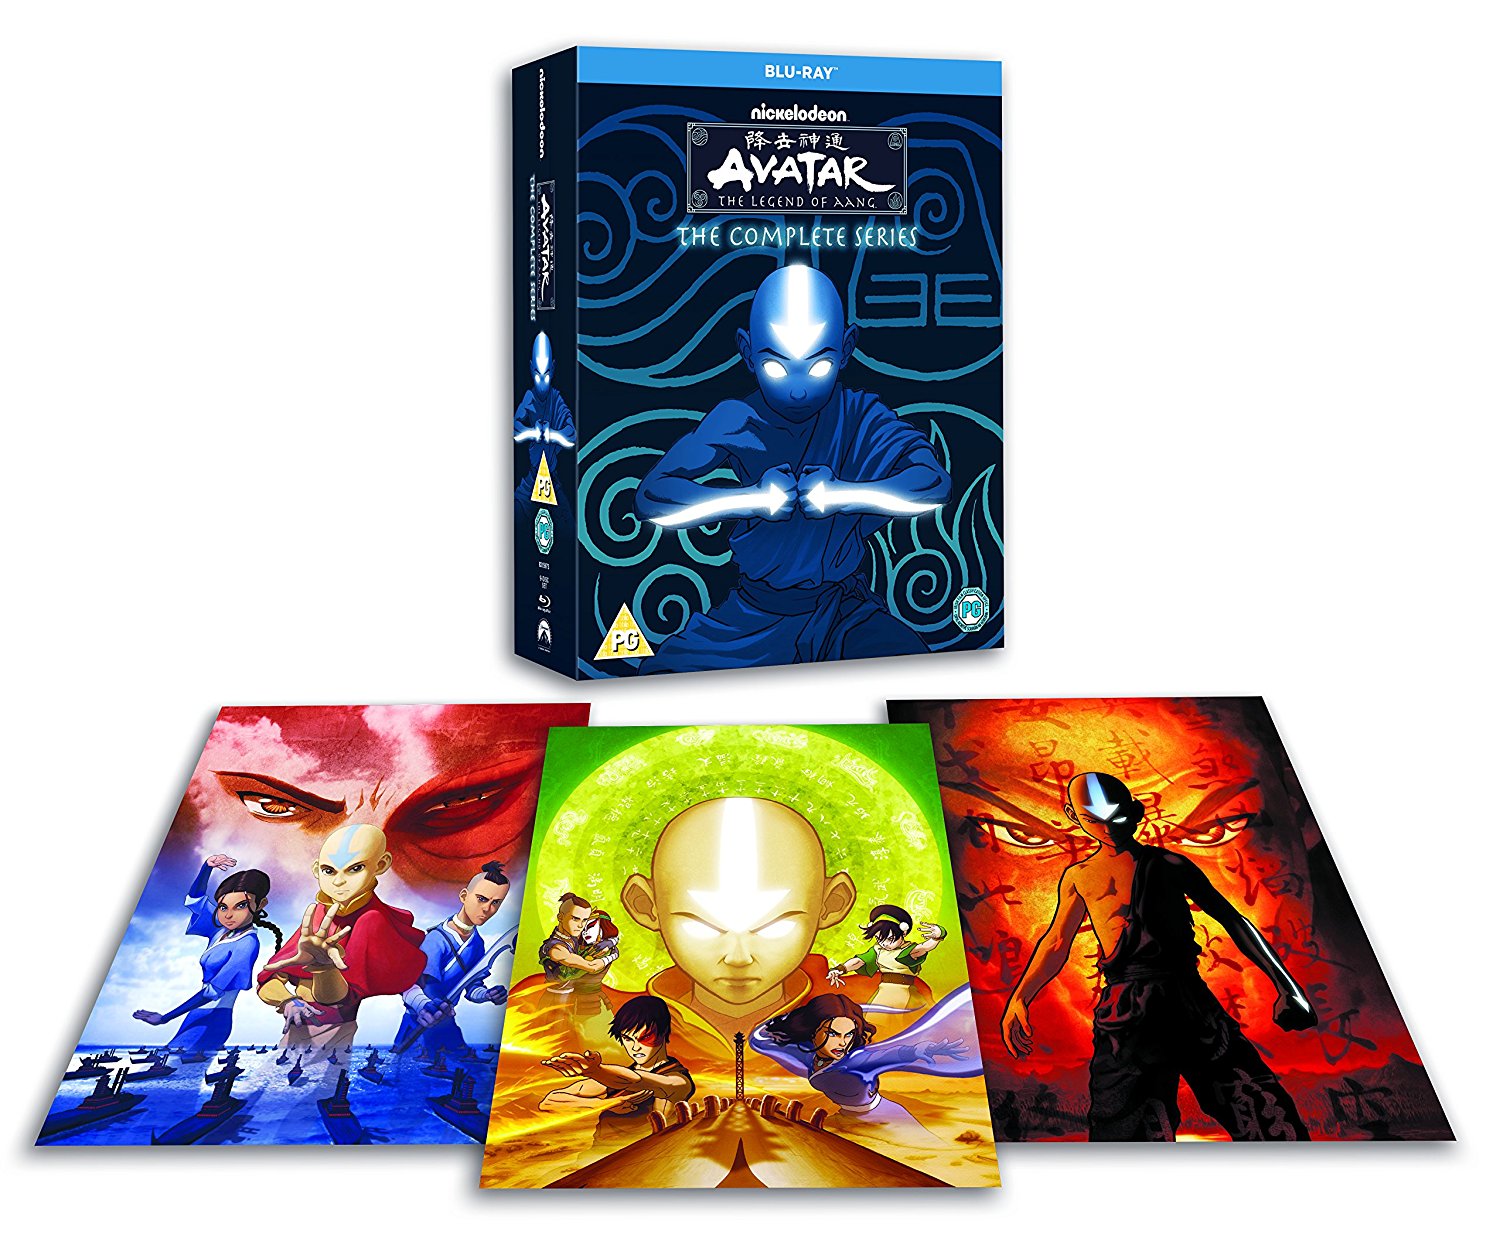 Amazoncom The Ultimate Aang  Korra Bluray Collection with Bonus Disc   Art Cards  Movies  TV